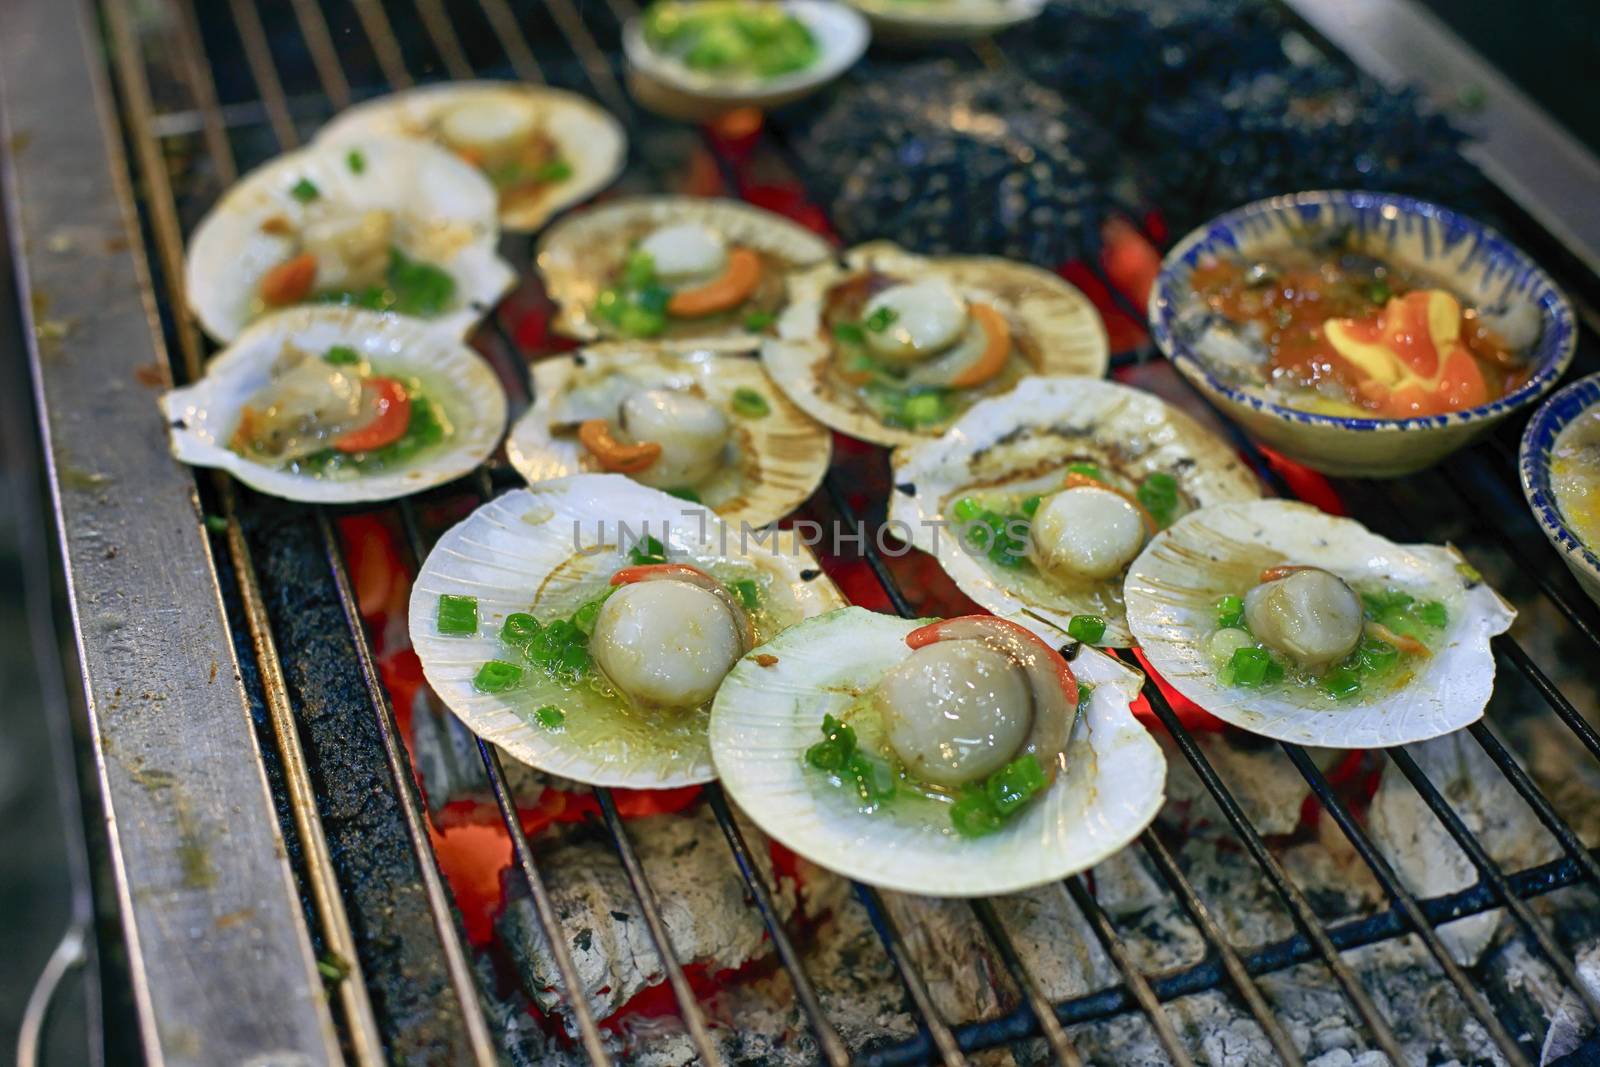 Scallops, commonly known as scallops by friday